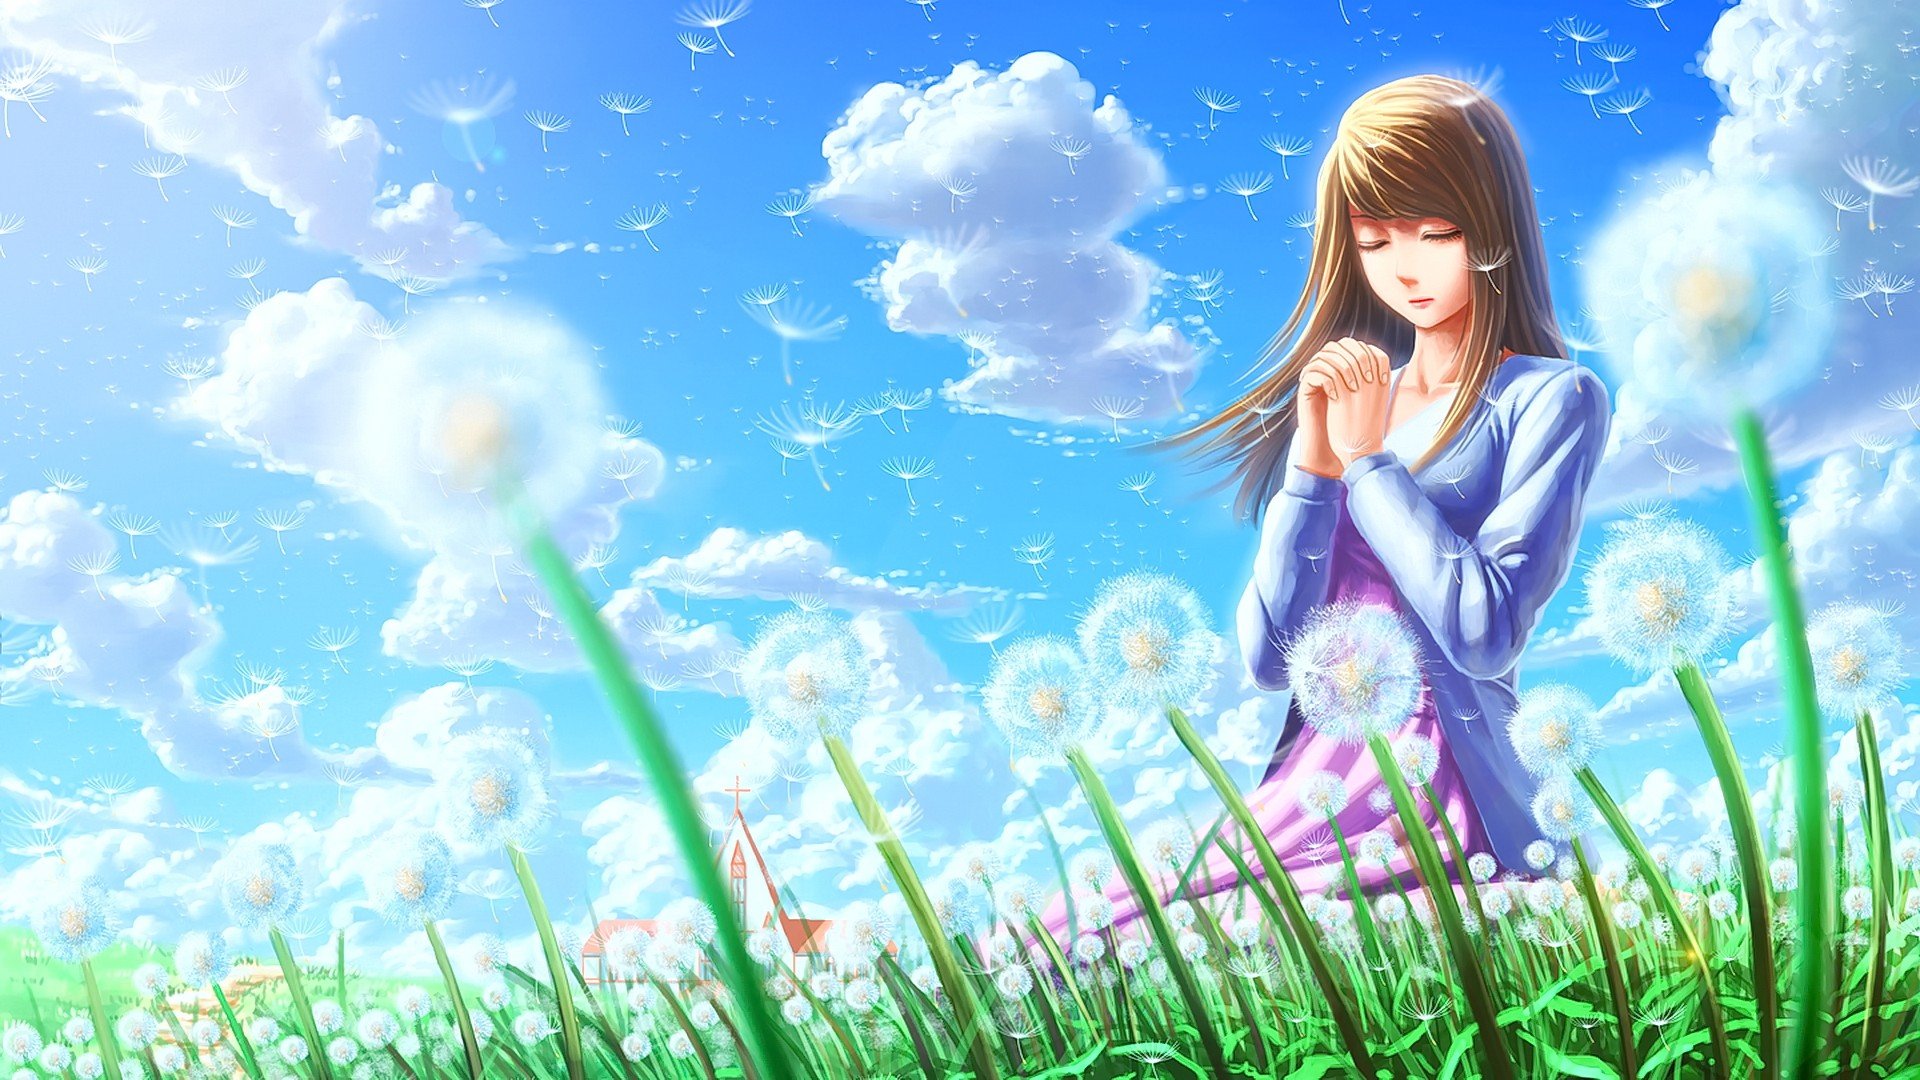 The 25 Best Anime Quotes About Nature - Anime Girl Hd Wallpapers 1080p -  1021x574 Wallpaper 